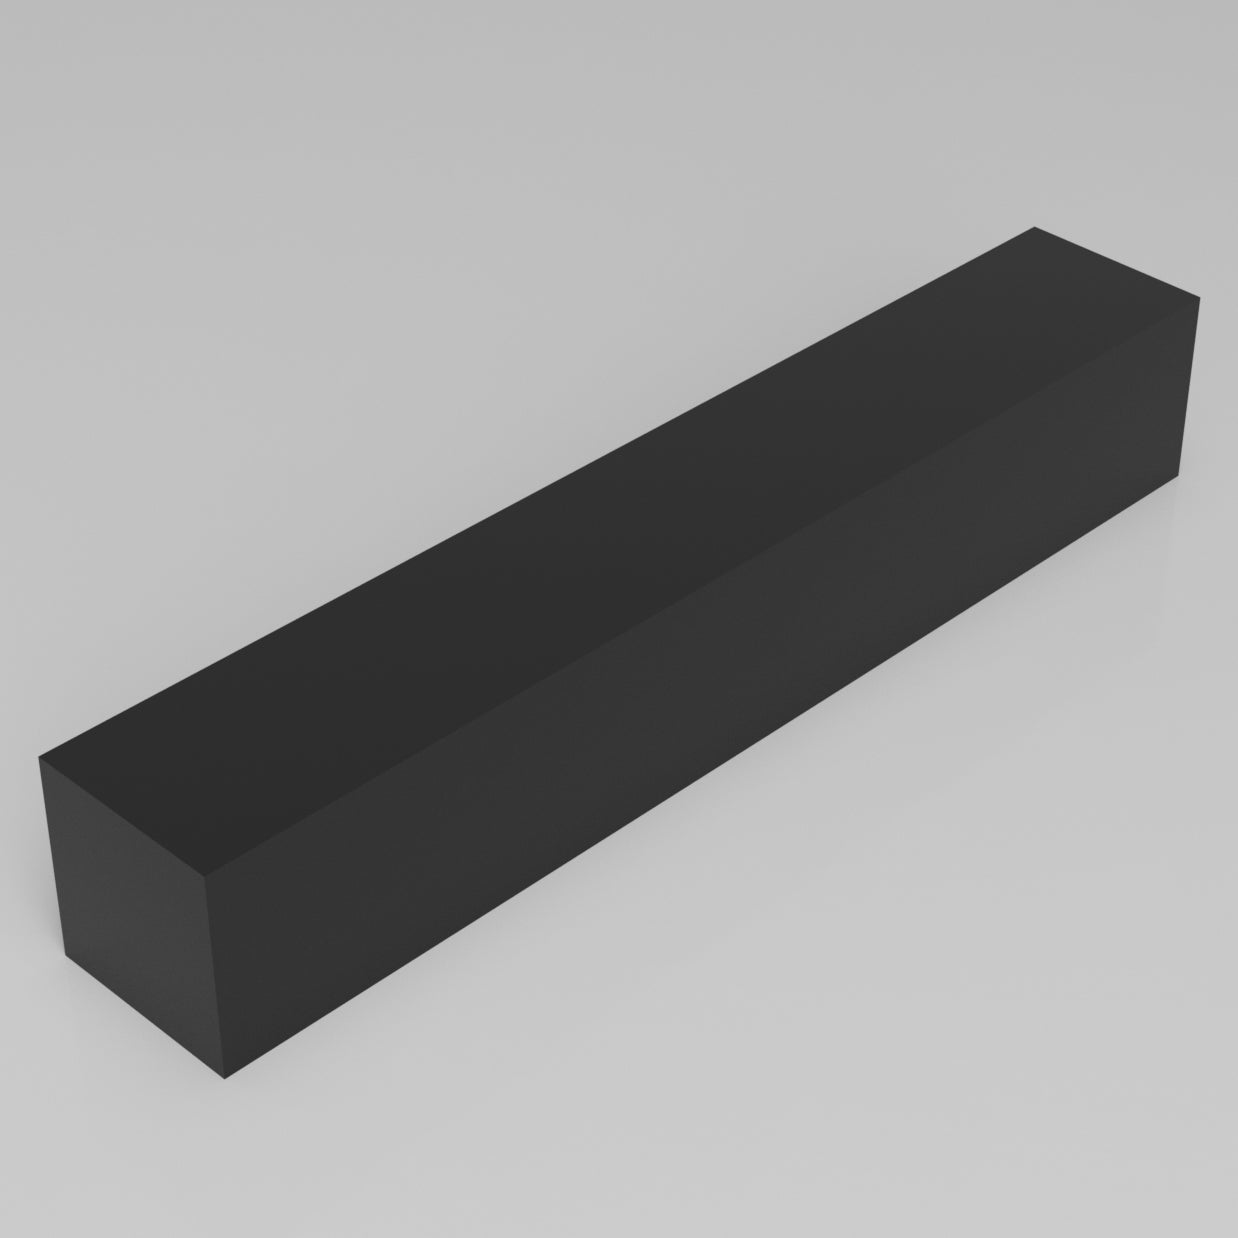 Machinable Wax Rectangular Block Front View 4 Inch by 4 Inch by 24 Inch